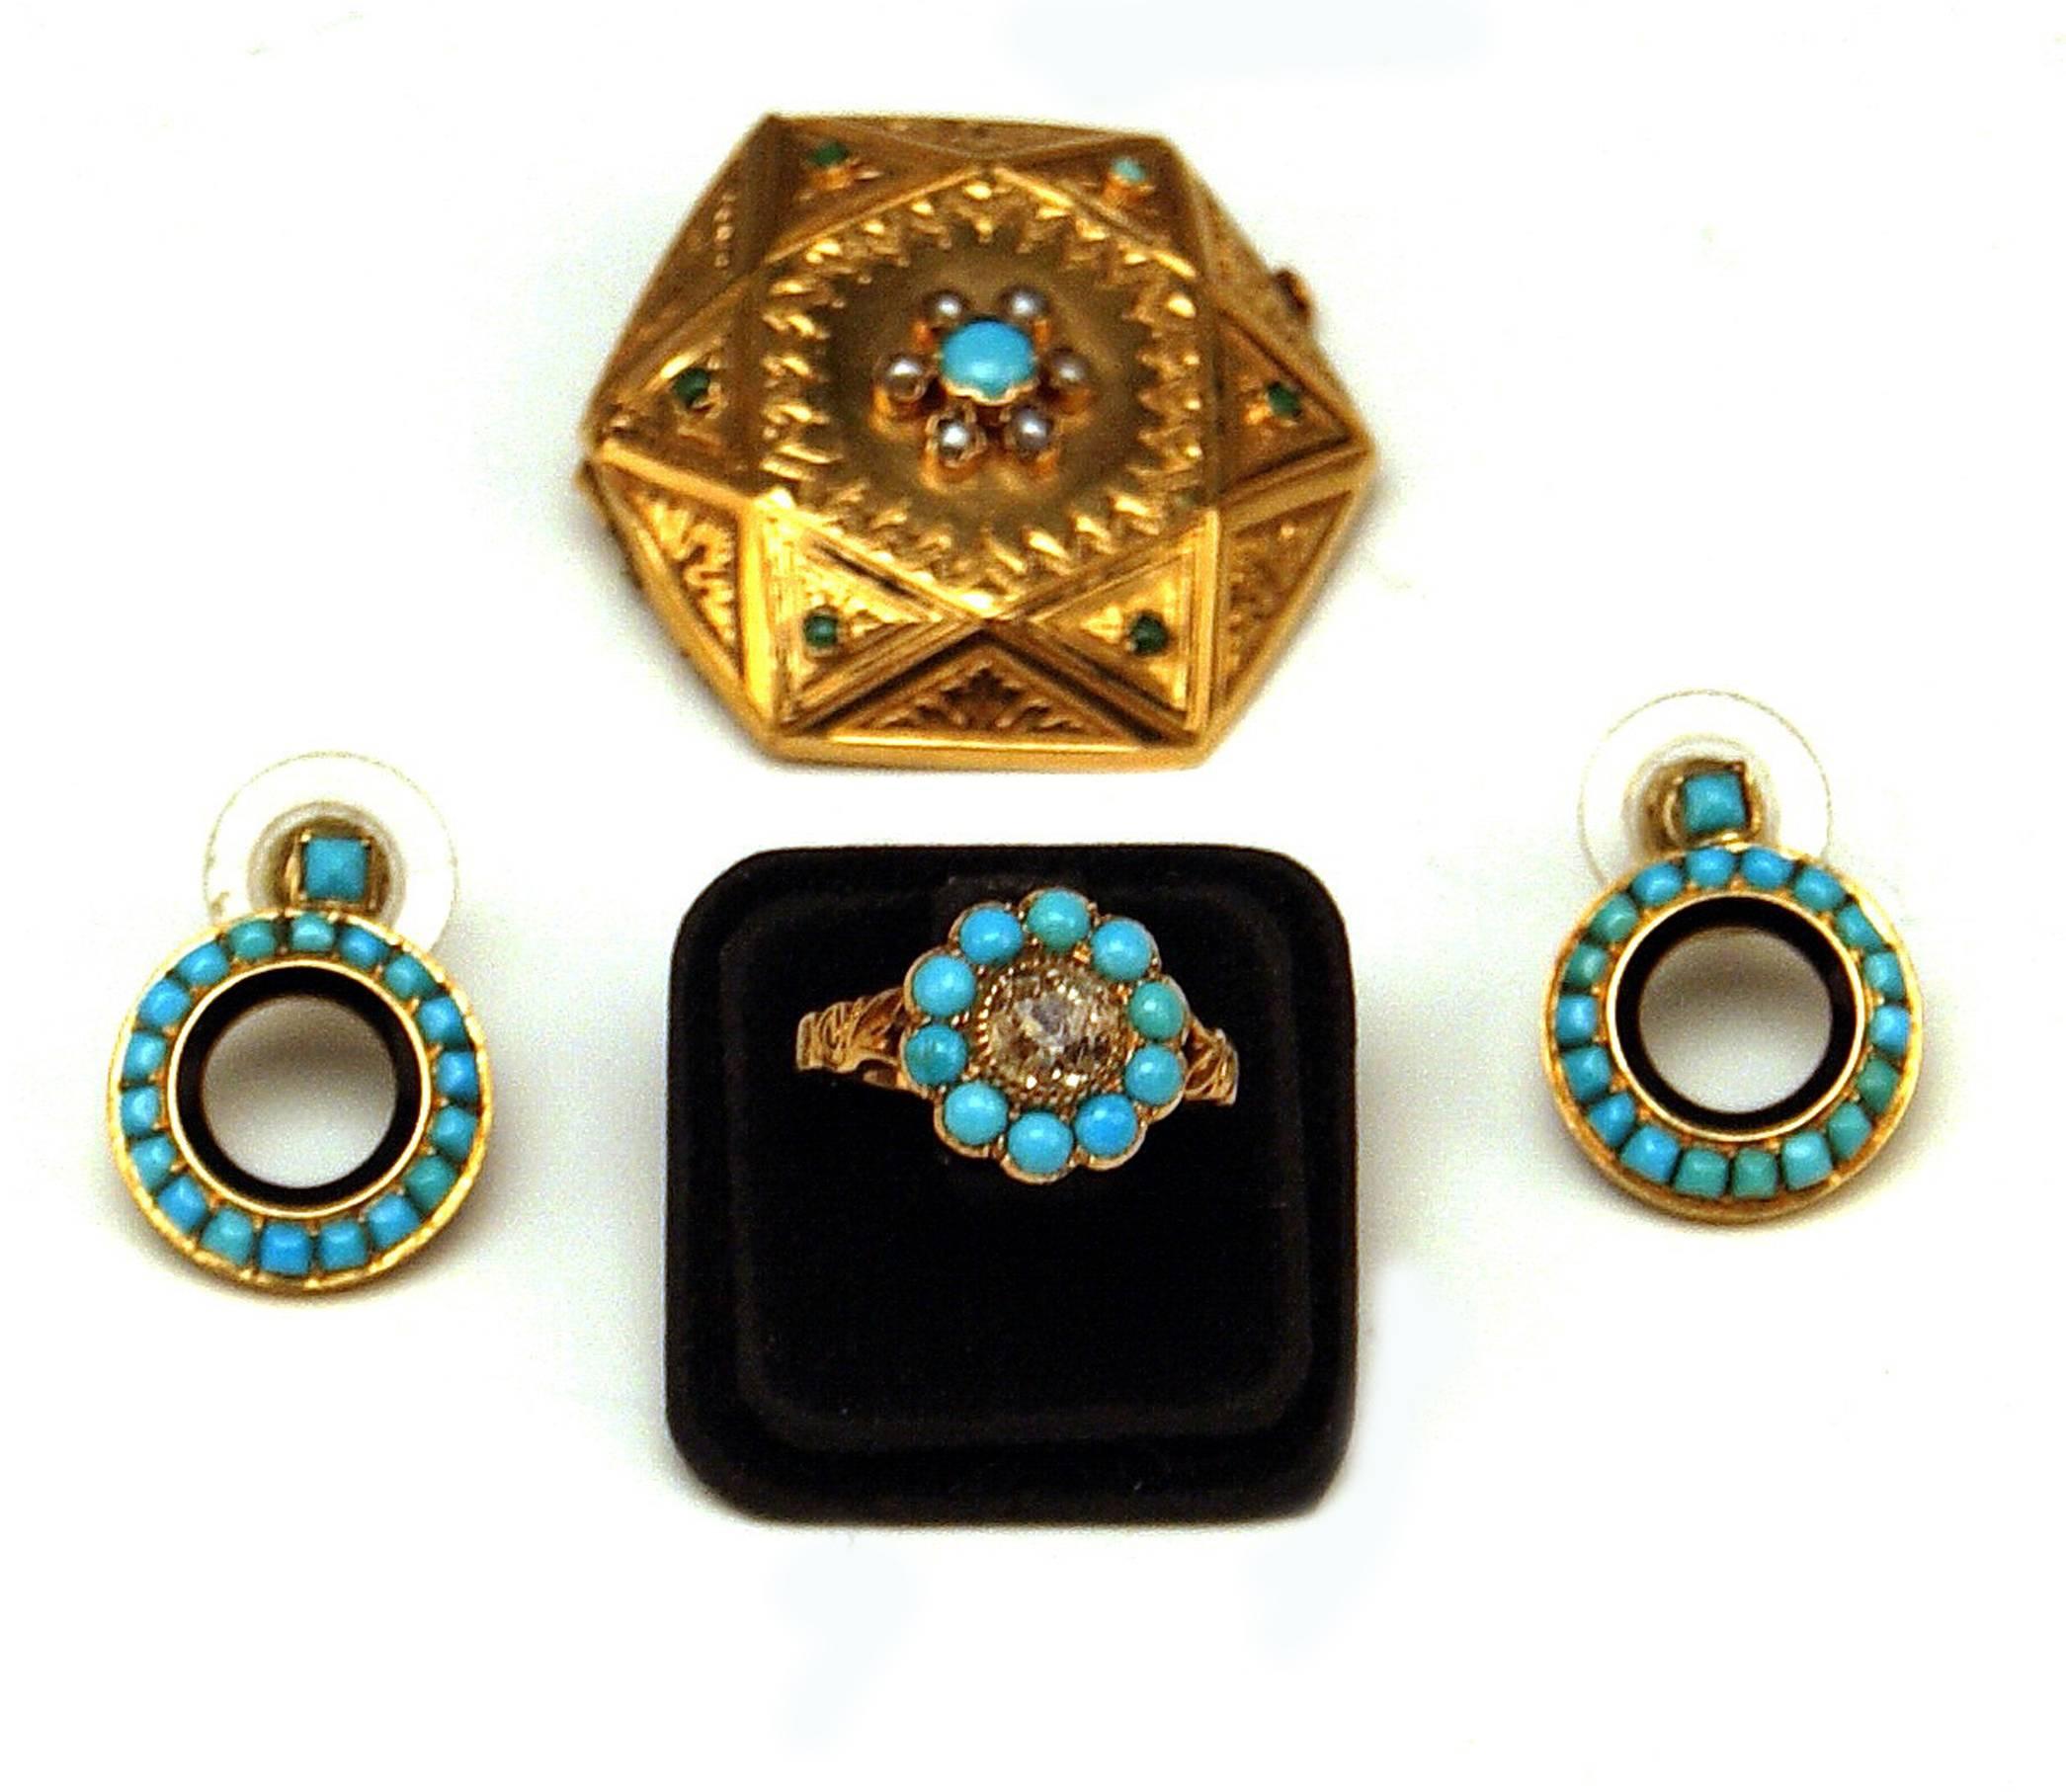 LATE VICTORIAN (= VIENNESE LATEST HISTORICISM) GOLDEN JEWELRY SET:
PAIR OF EARRINGS as well as RING and BROOCH MADE OF GOLD 14ct decorated with TURQUOISES, PEARLS and DIAMOND.

ELEGANT BROOCH:
made of GOLD  (14 ct / 585), having hexagonal form (=